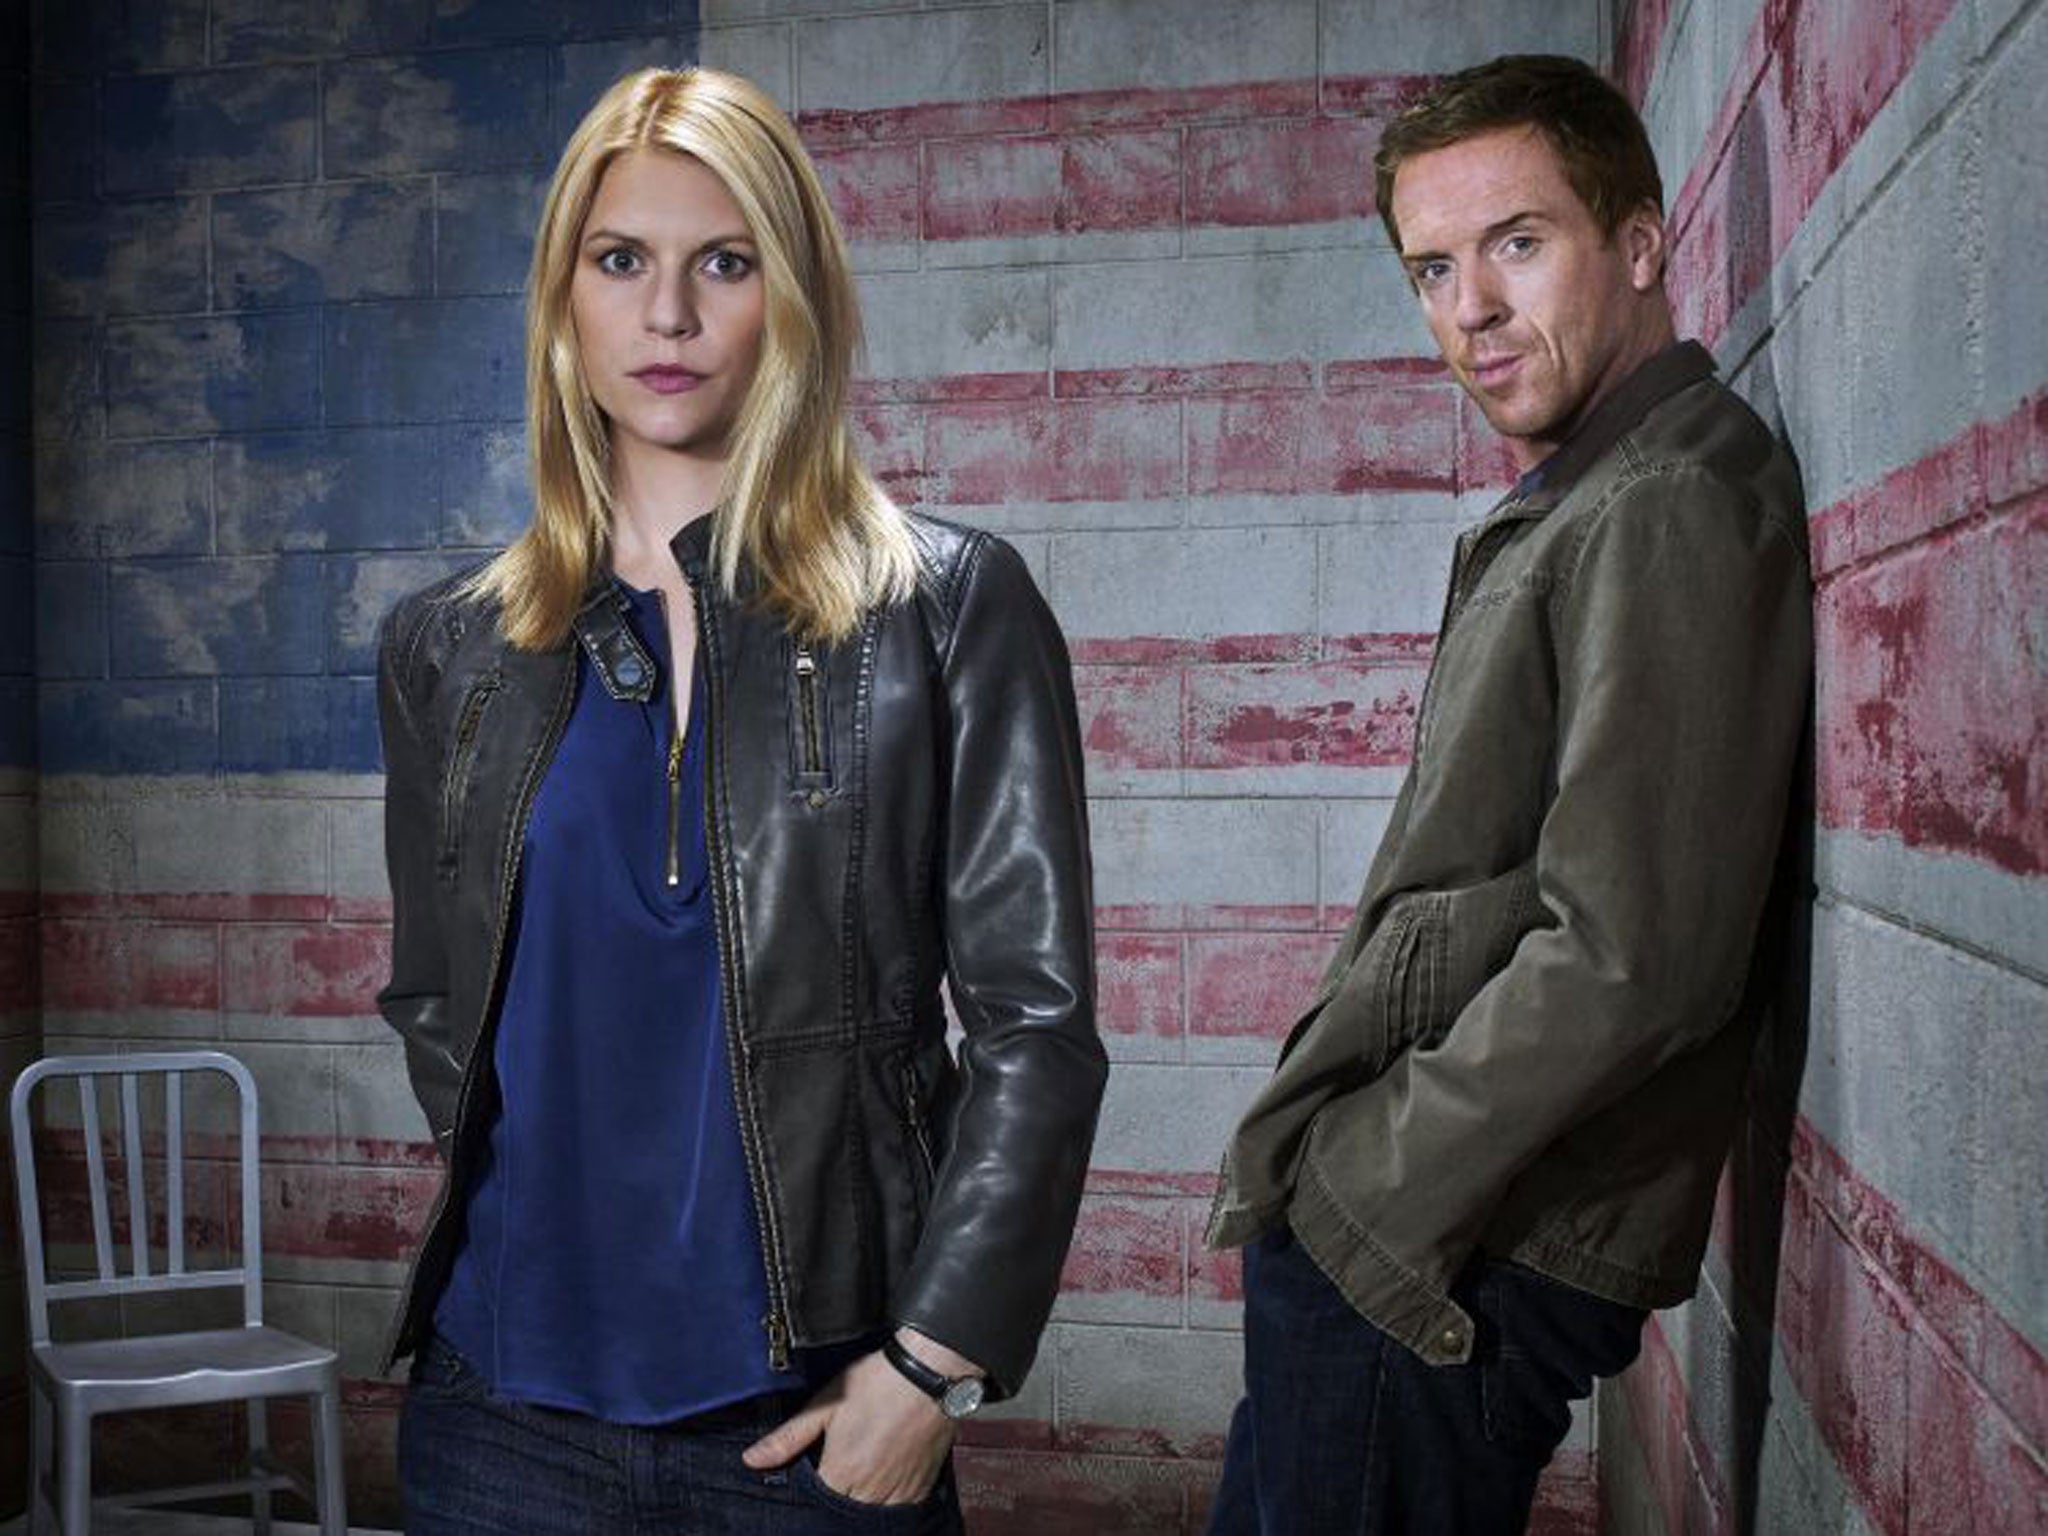 Claire Danes as Carrie Mathison and Damian Lewis as Nicholas Brody return for the third season of ‘Homeland’